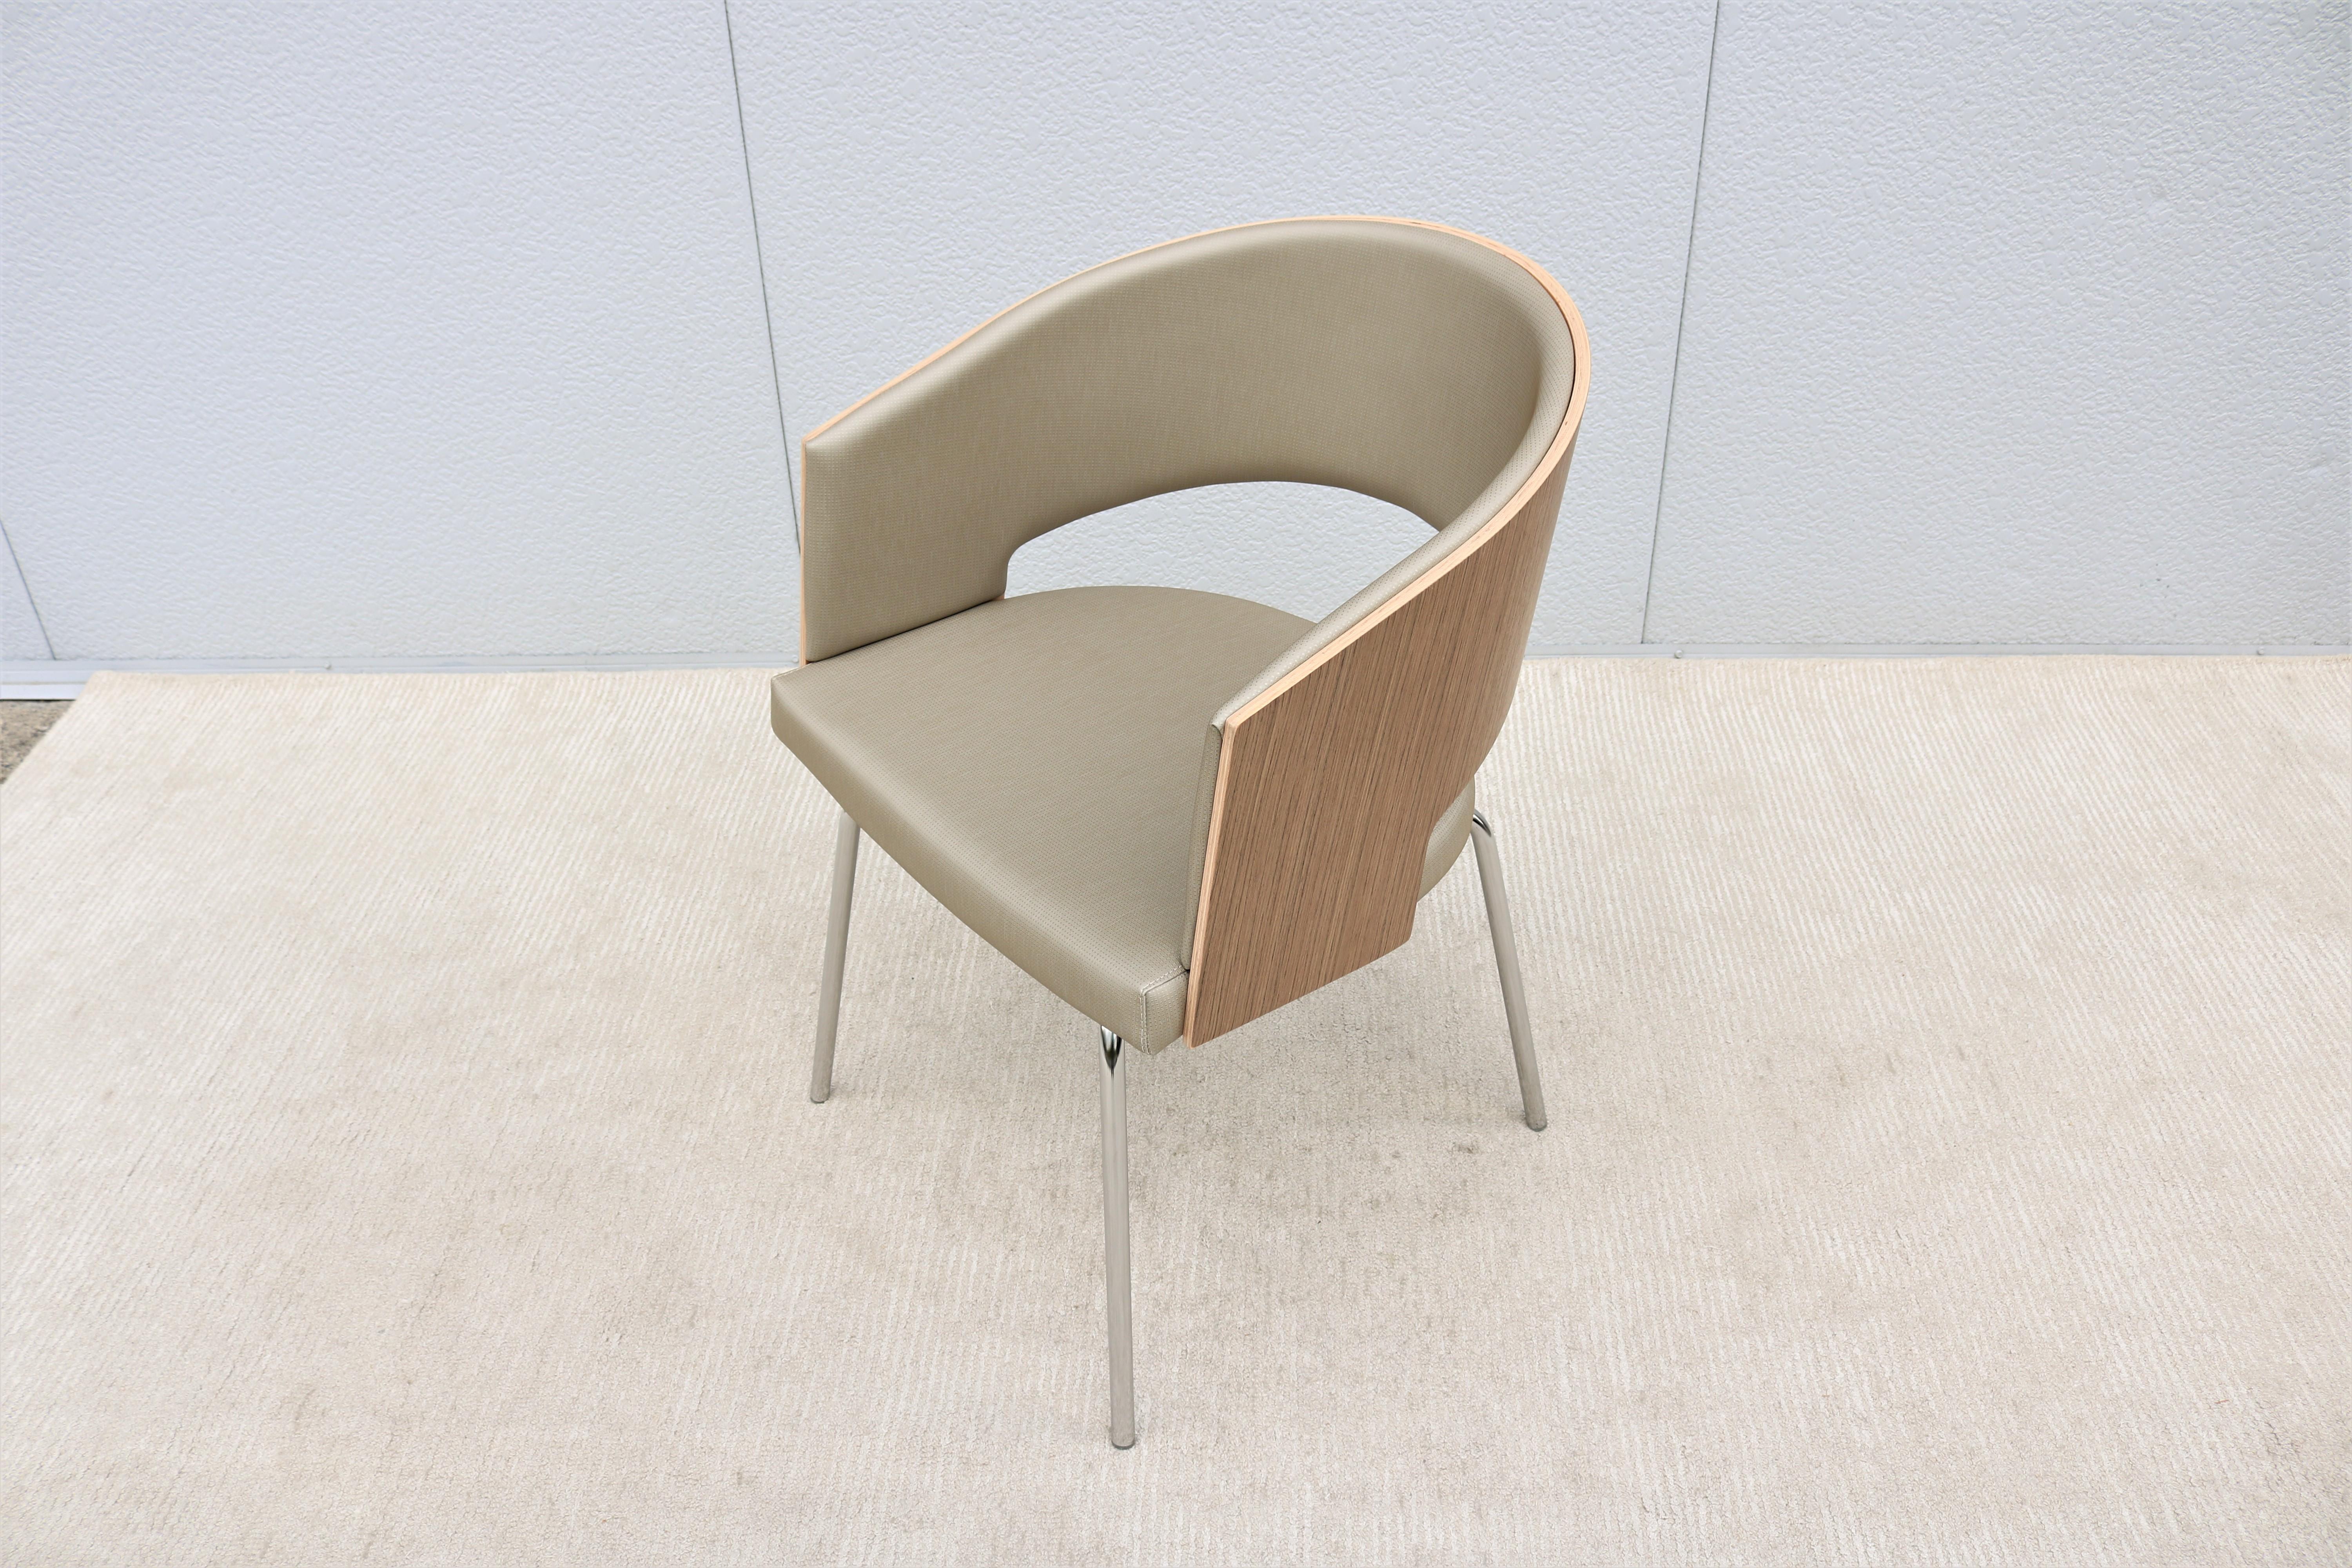 Steel Contemporary Modern Source Botte Multiuse Dining Chair Brand New, 7 Available For Sale